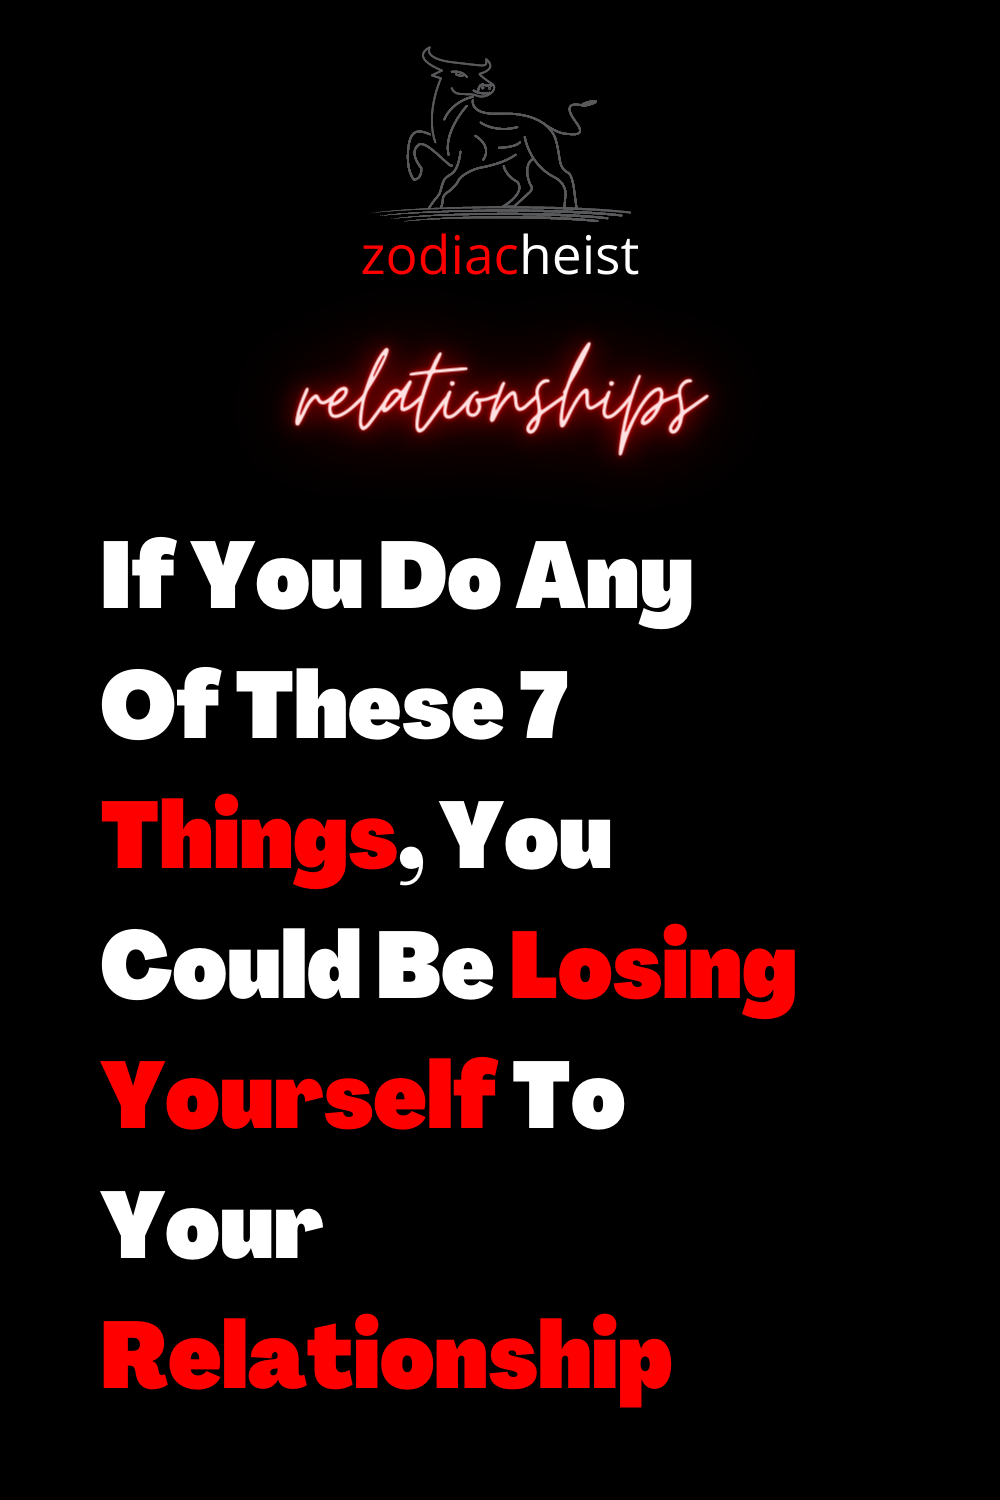 If You Do Any Of These 7 Things, You Could Be Losing Yourself To Your Relationship